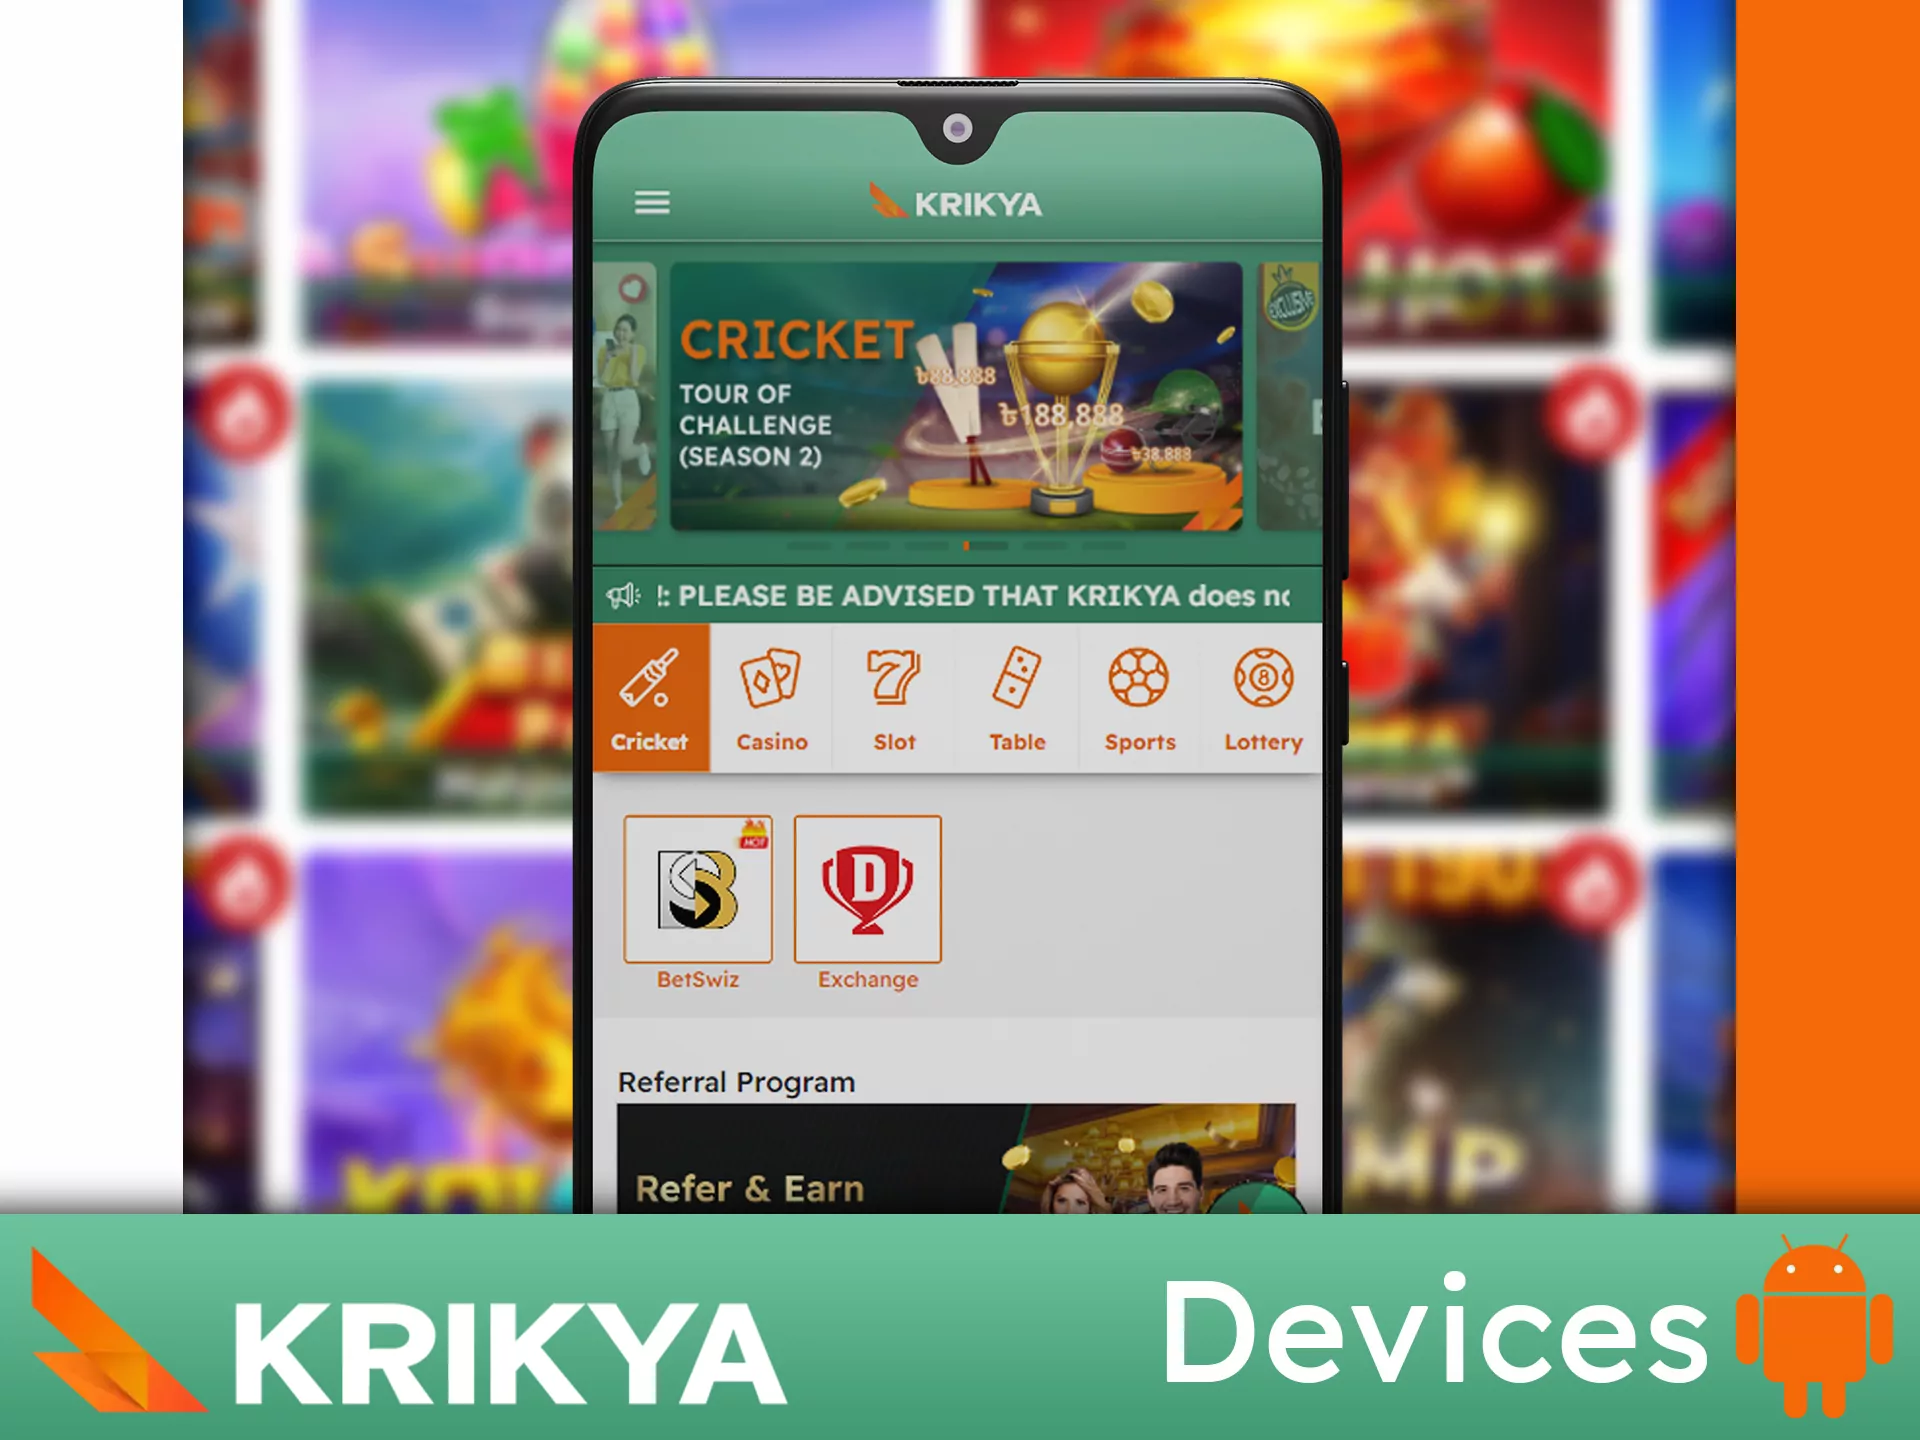 You can install Krikya app on any of yours Android device.